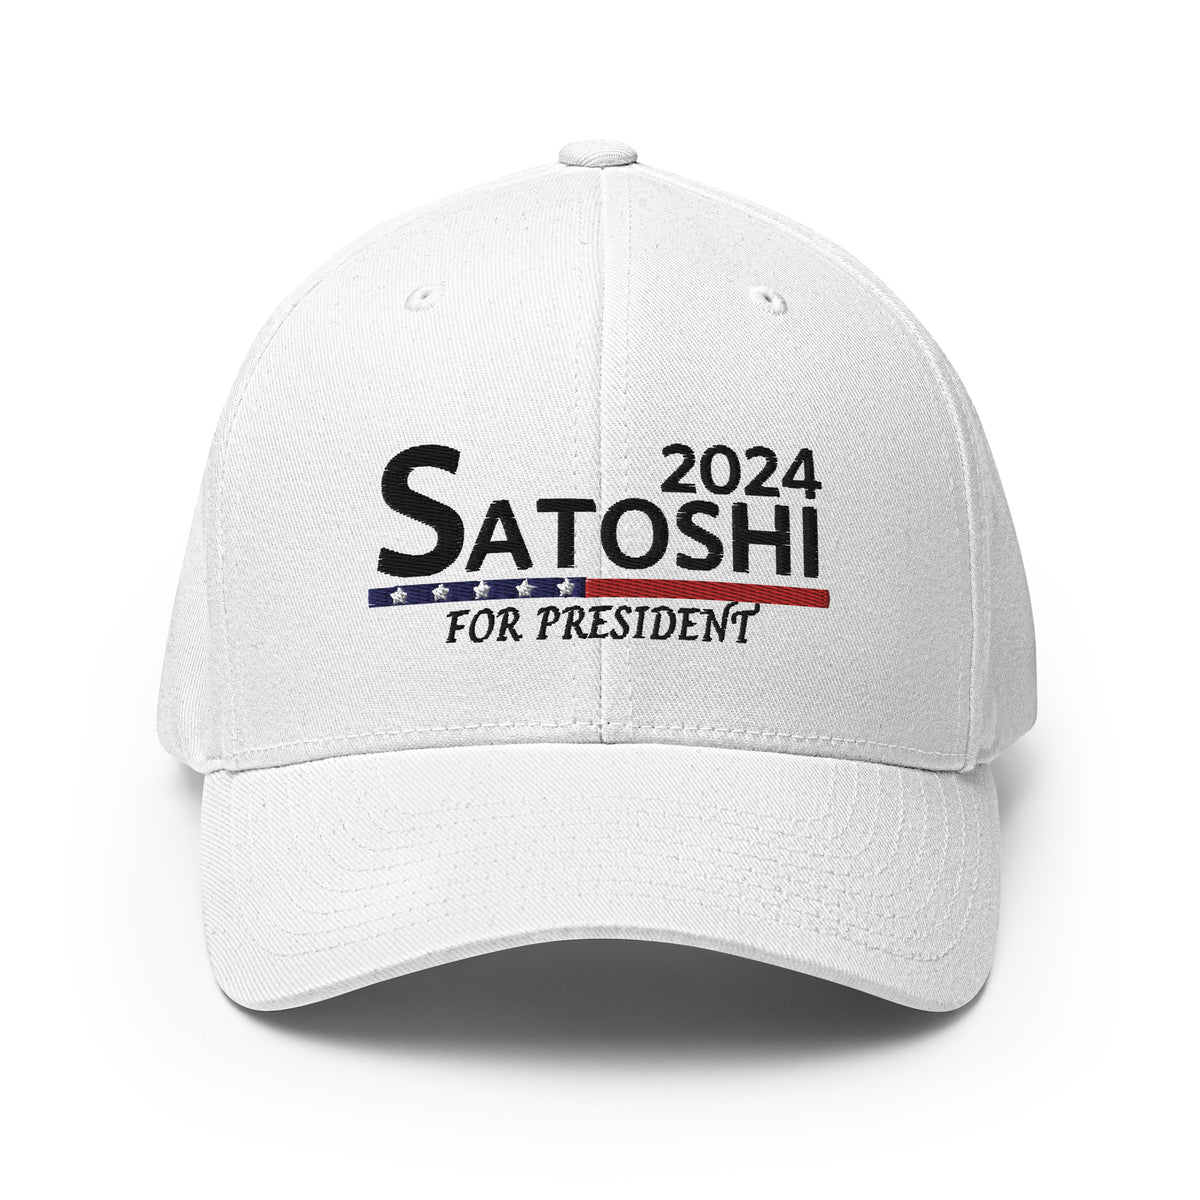 Satoshi For President 2024 (Black Embroidery) Bitcoin Flexfit Hat